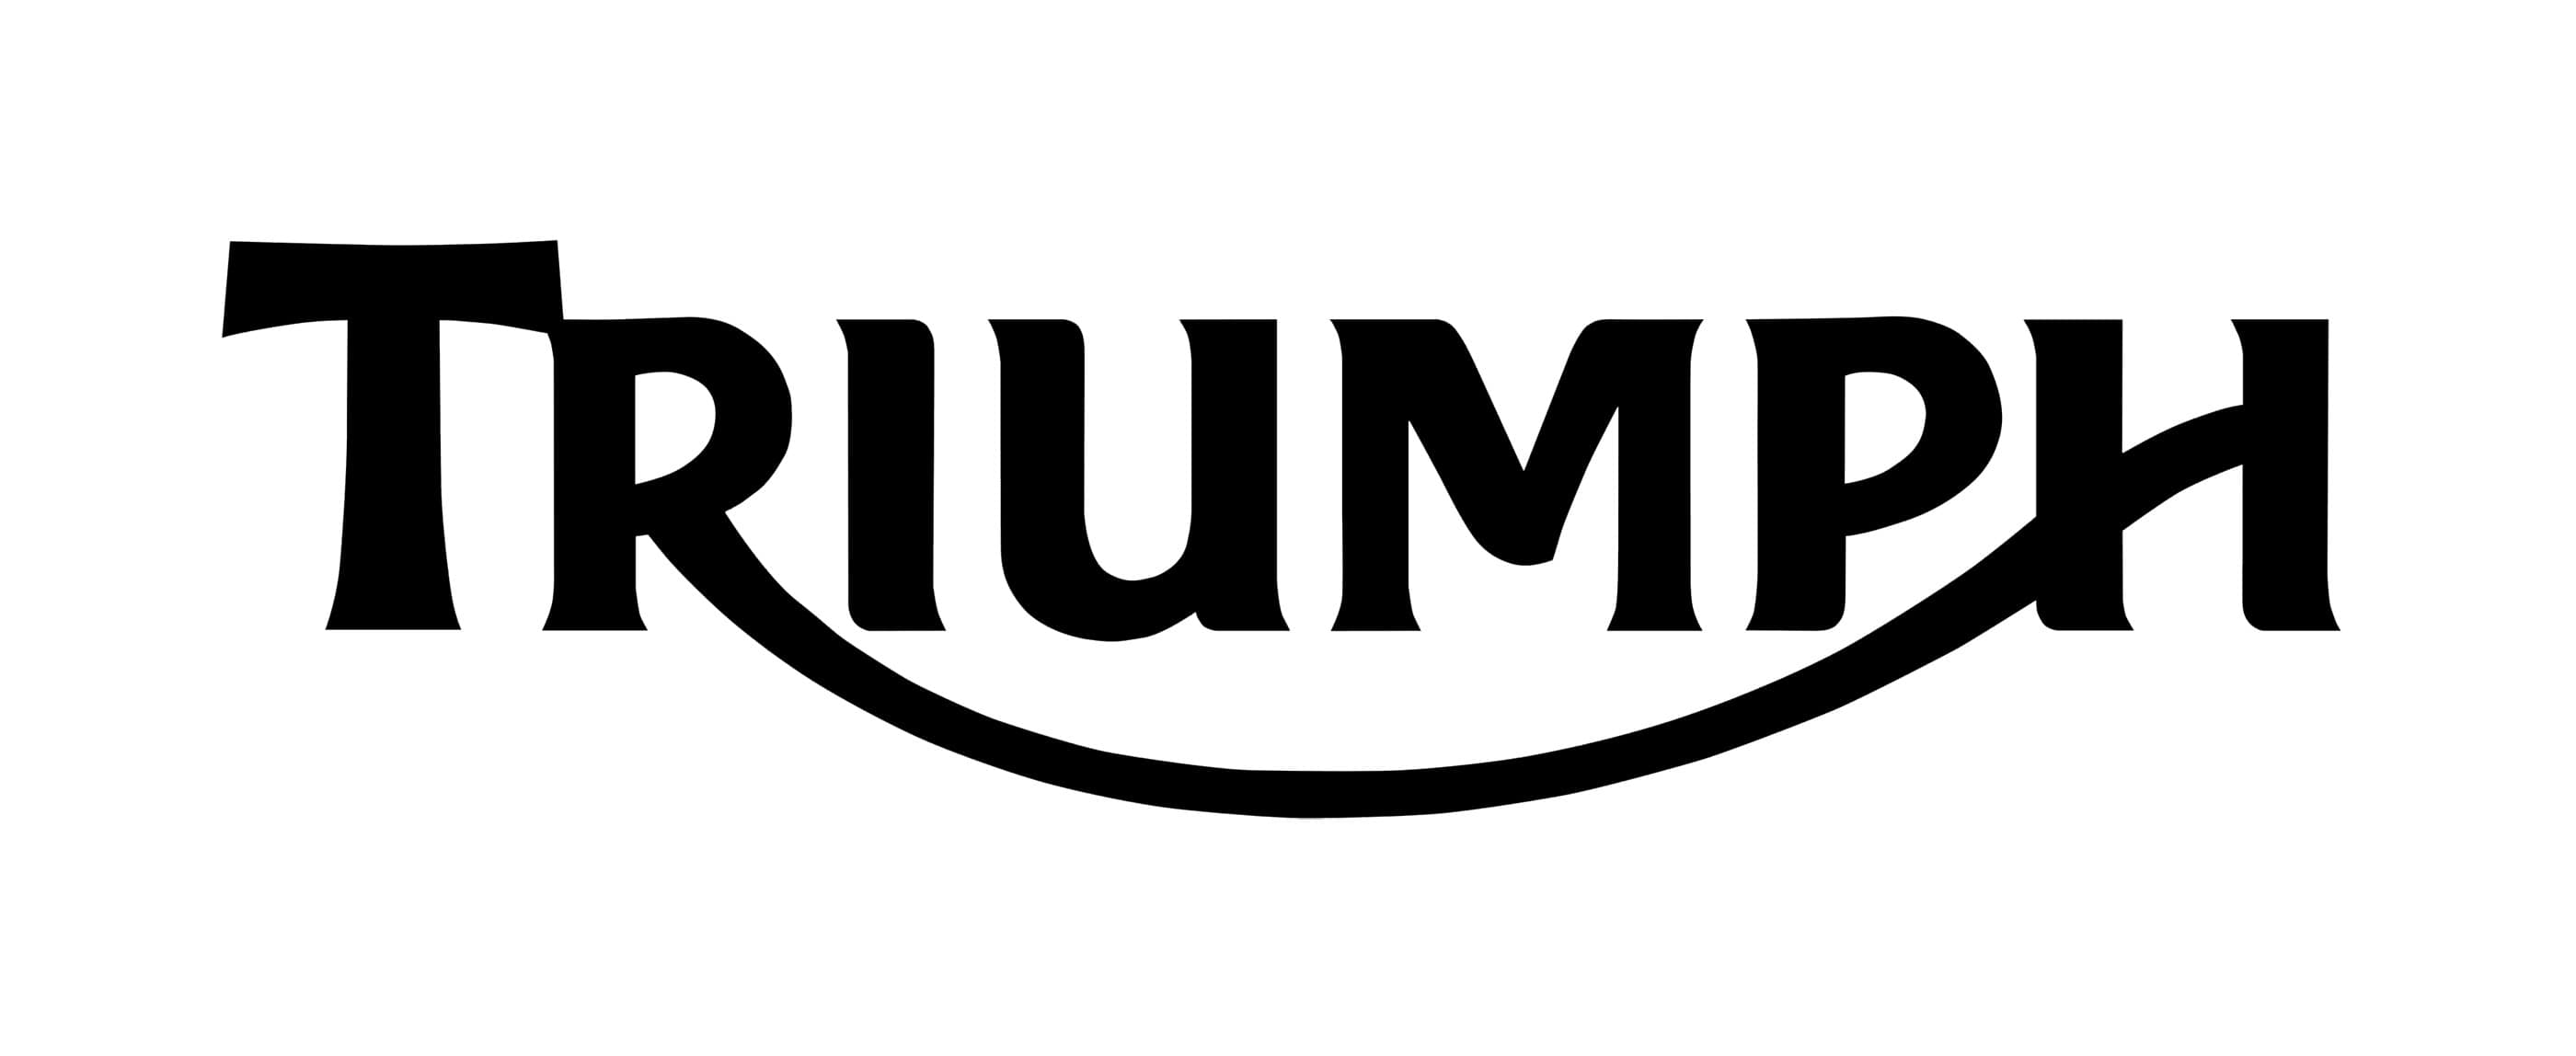 Truimph Logo - Triumph logo: history, evolution, meaning | Motorcycle Brands